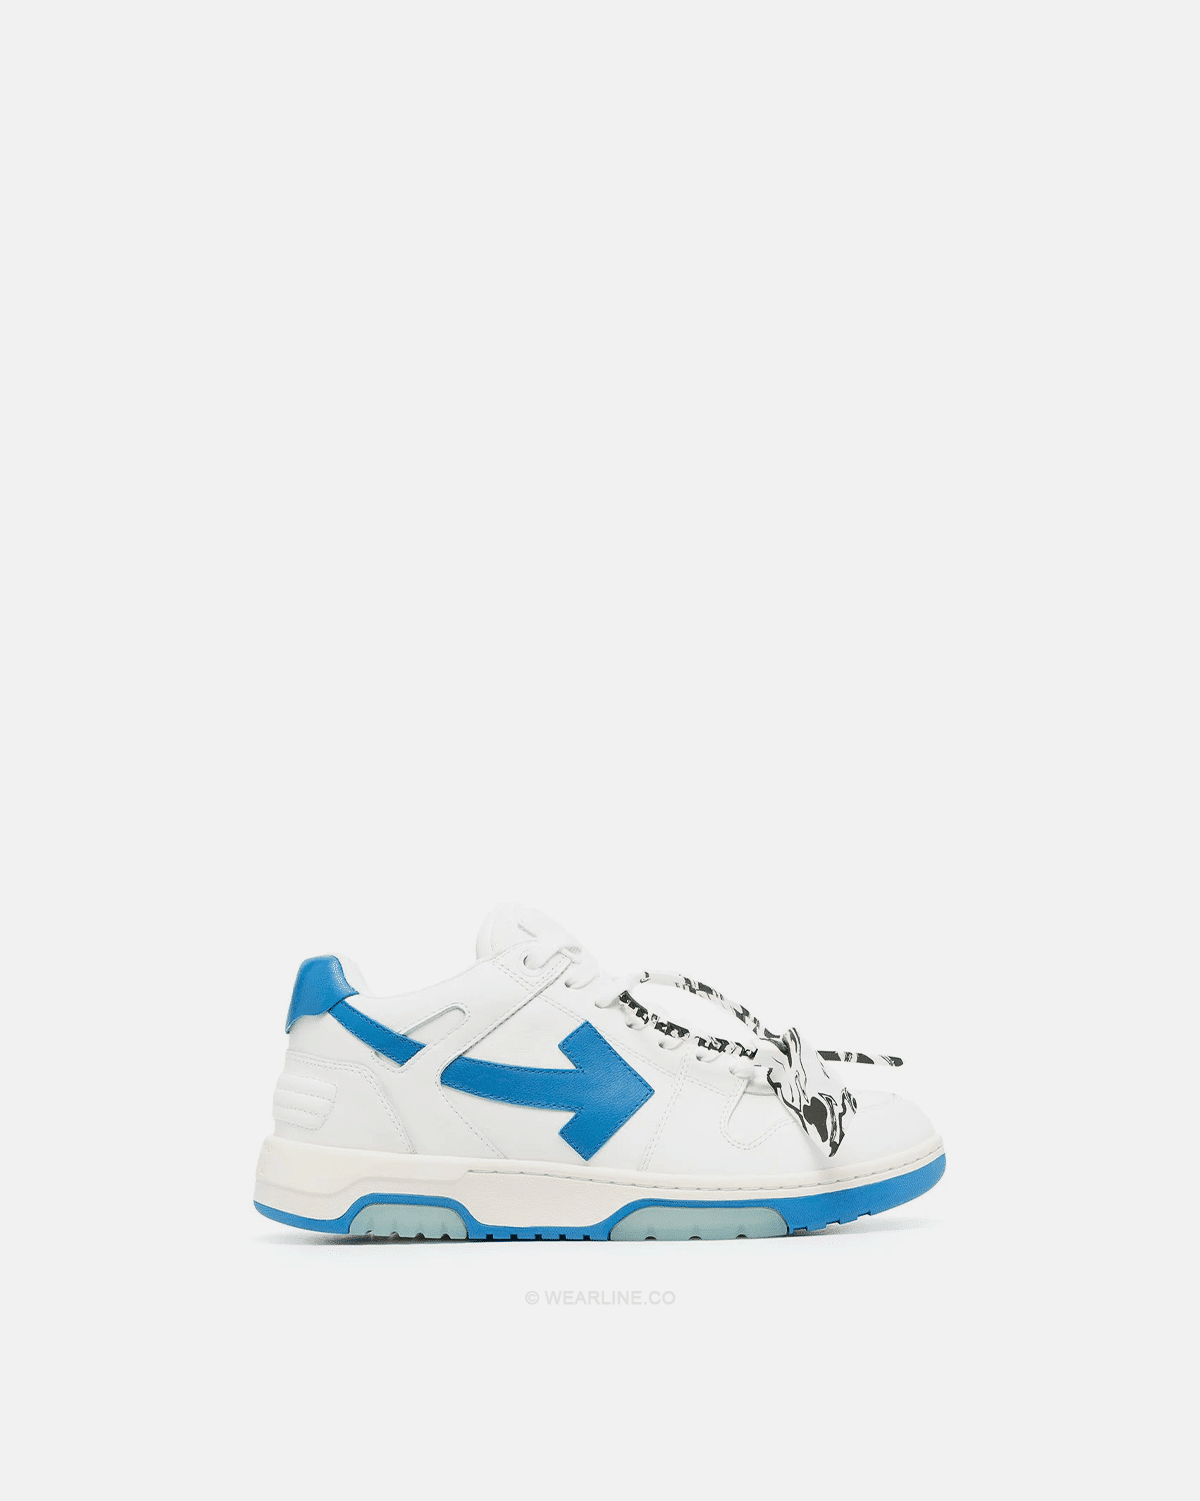 OFF-WHITE x OUT OF OFFICE | WEARLINE